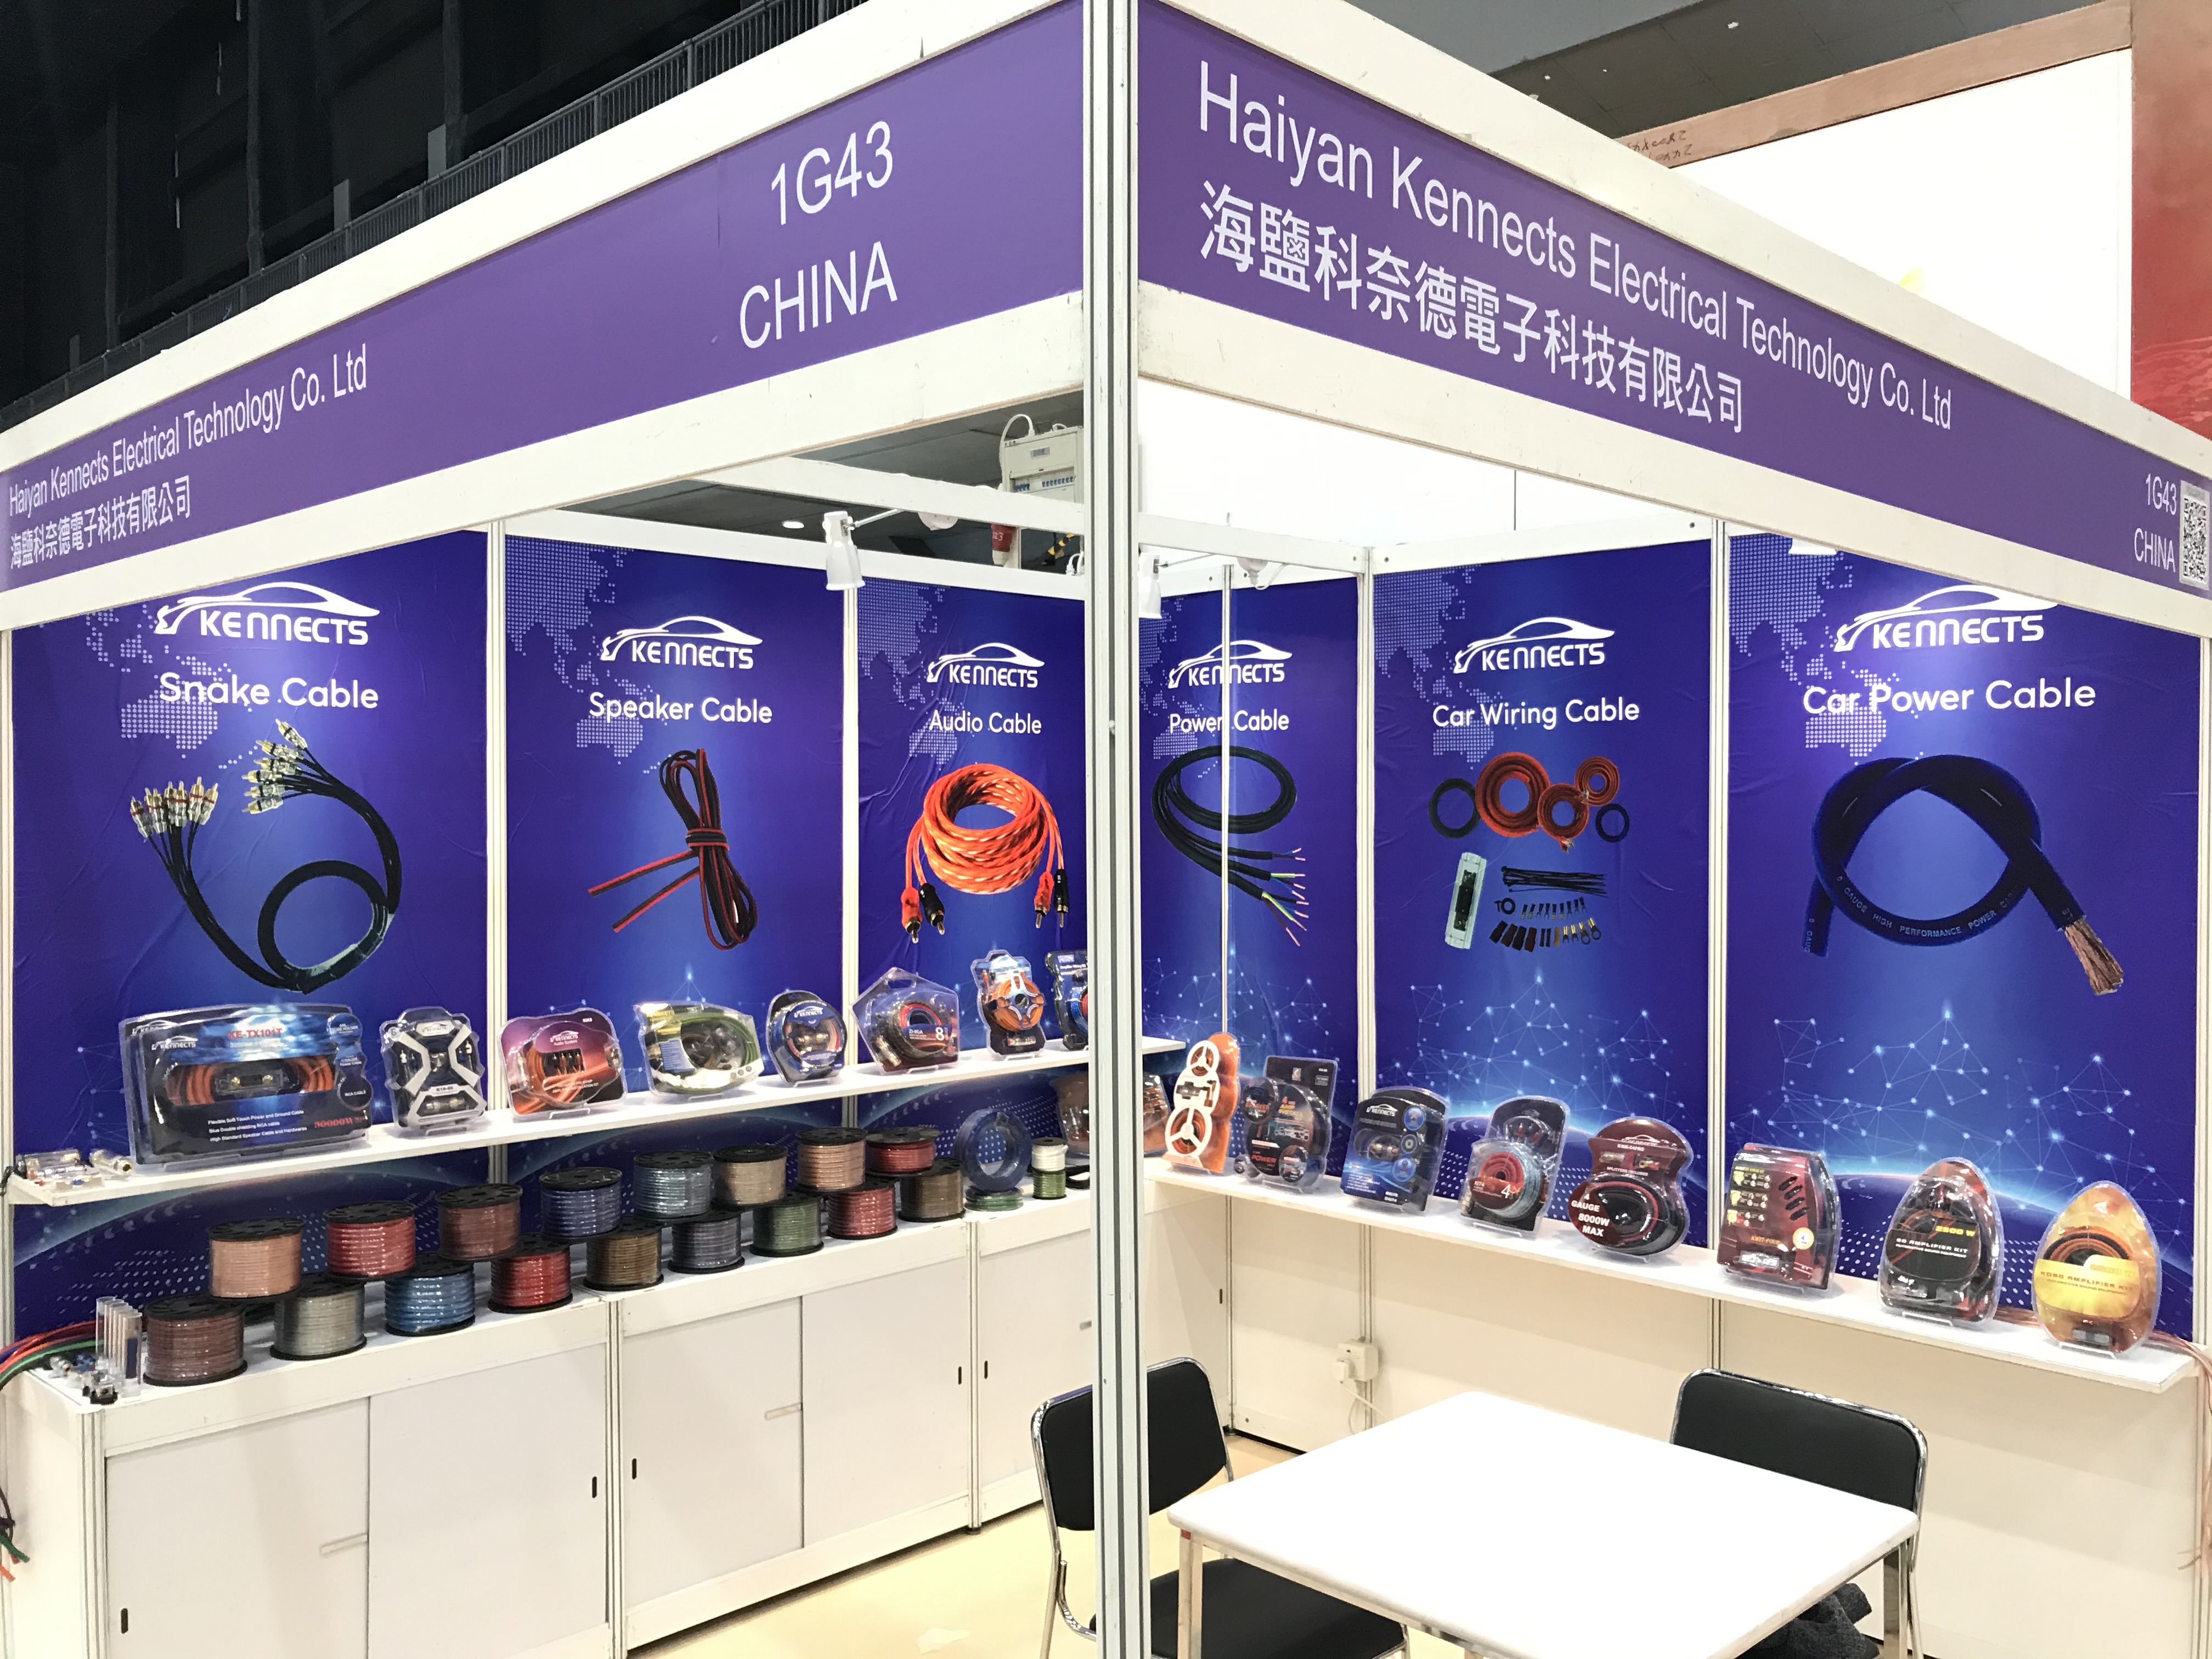 Hong Kong Global Sources Electronic Fair Booth nummer 7P40